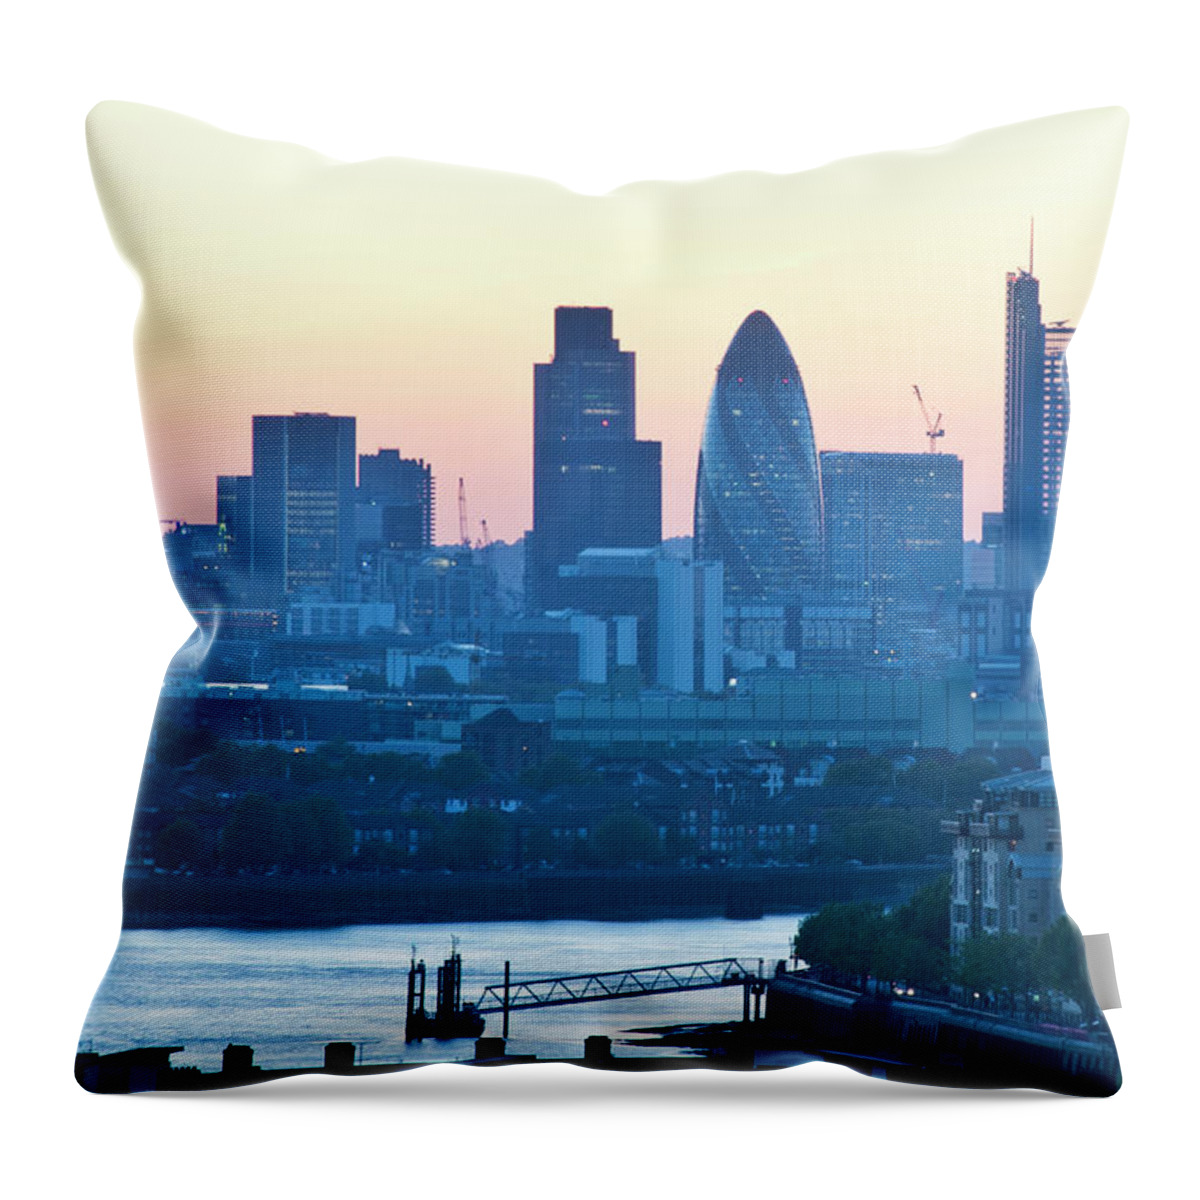 Downtown District Throw Pillow featuring the photograph River Thames And Skyline, London by John Harper